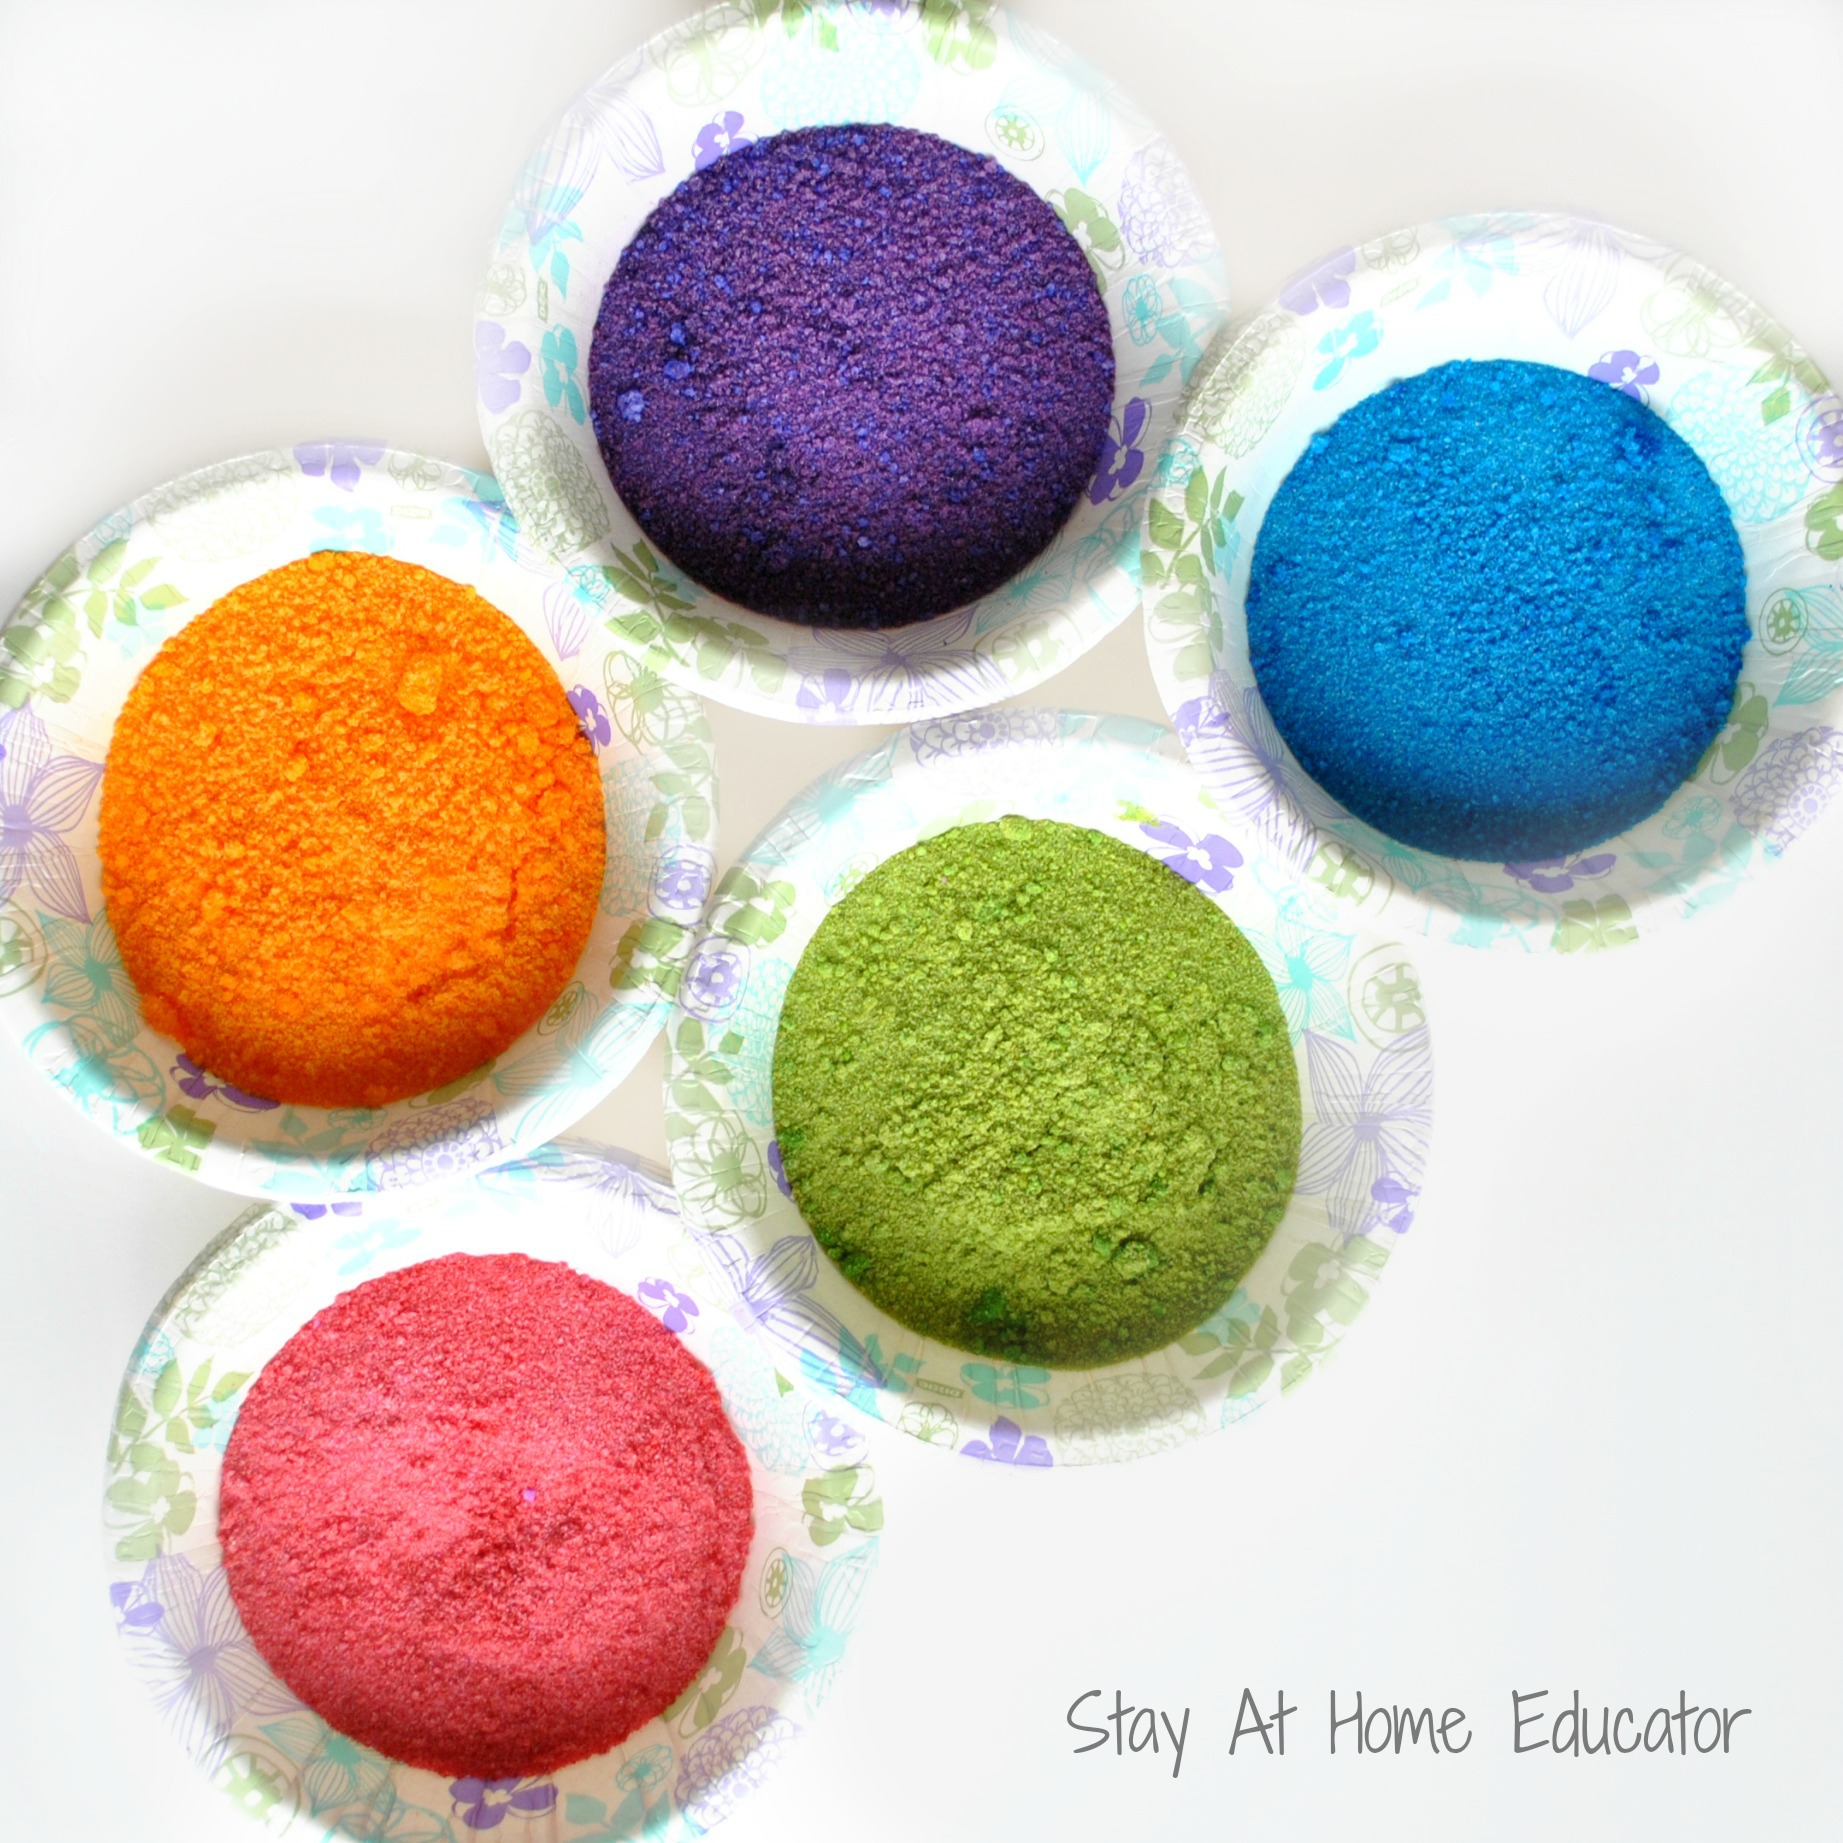 Dye salt with food coloring instead of paying for expensive colored sand - Stay At Home Educator